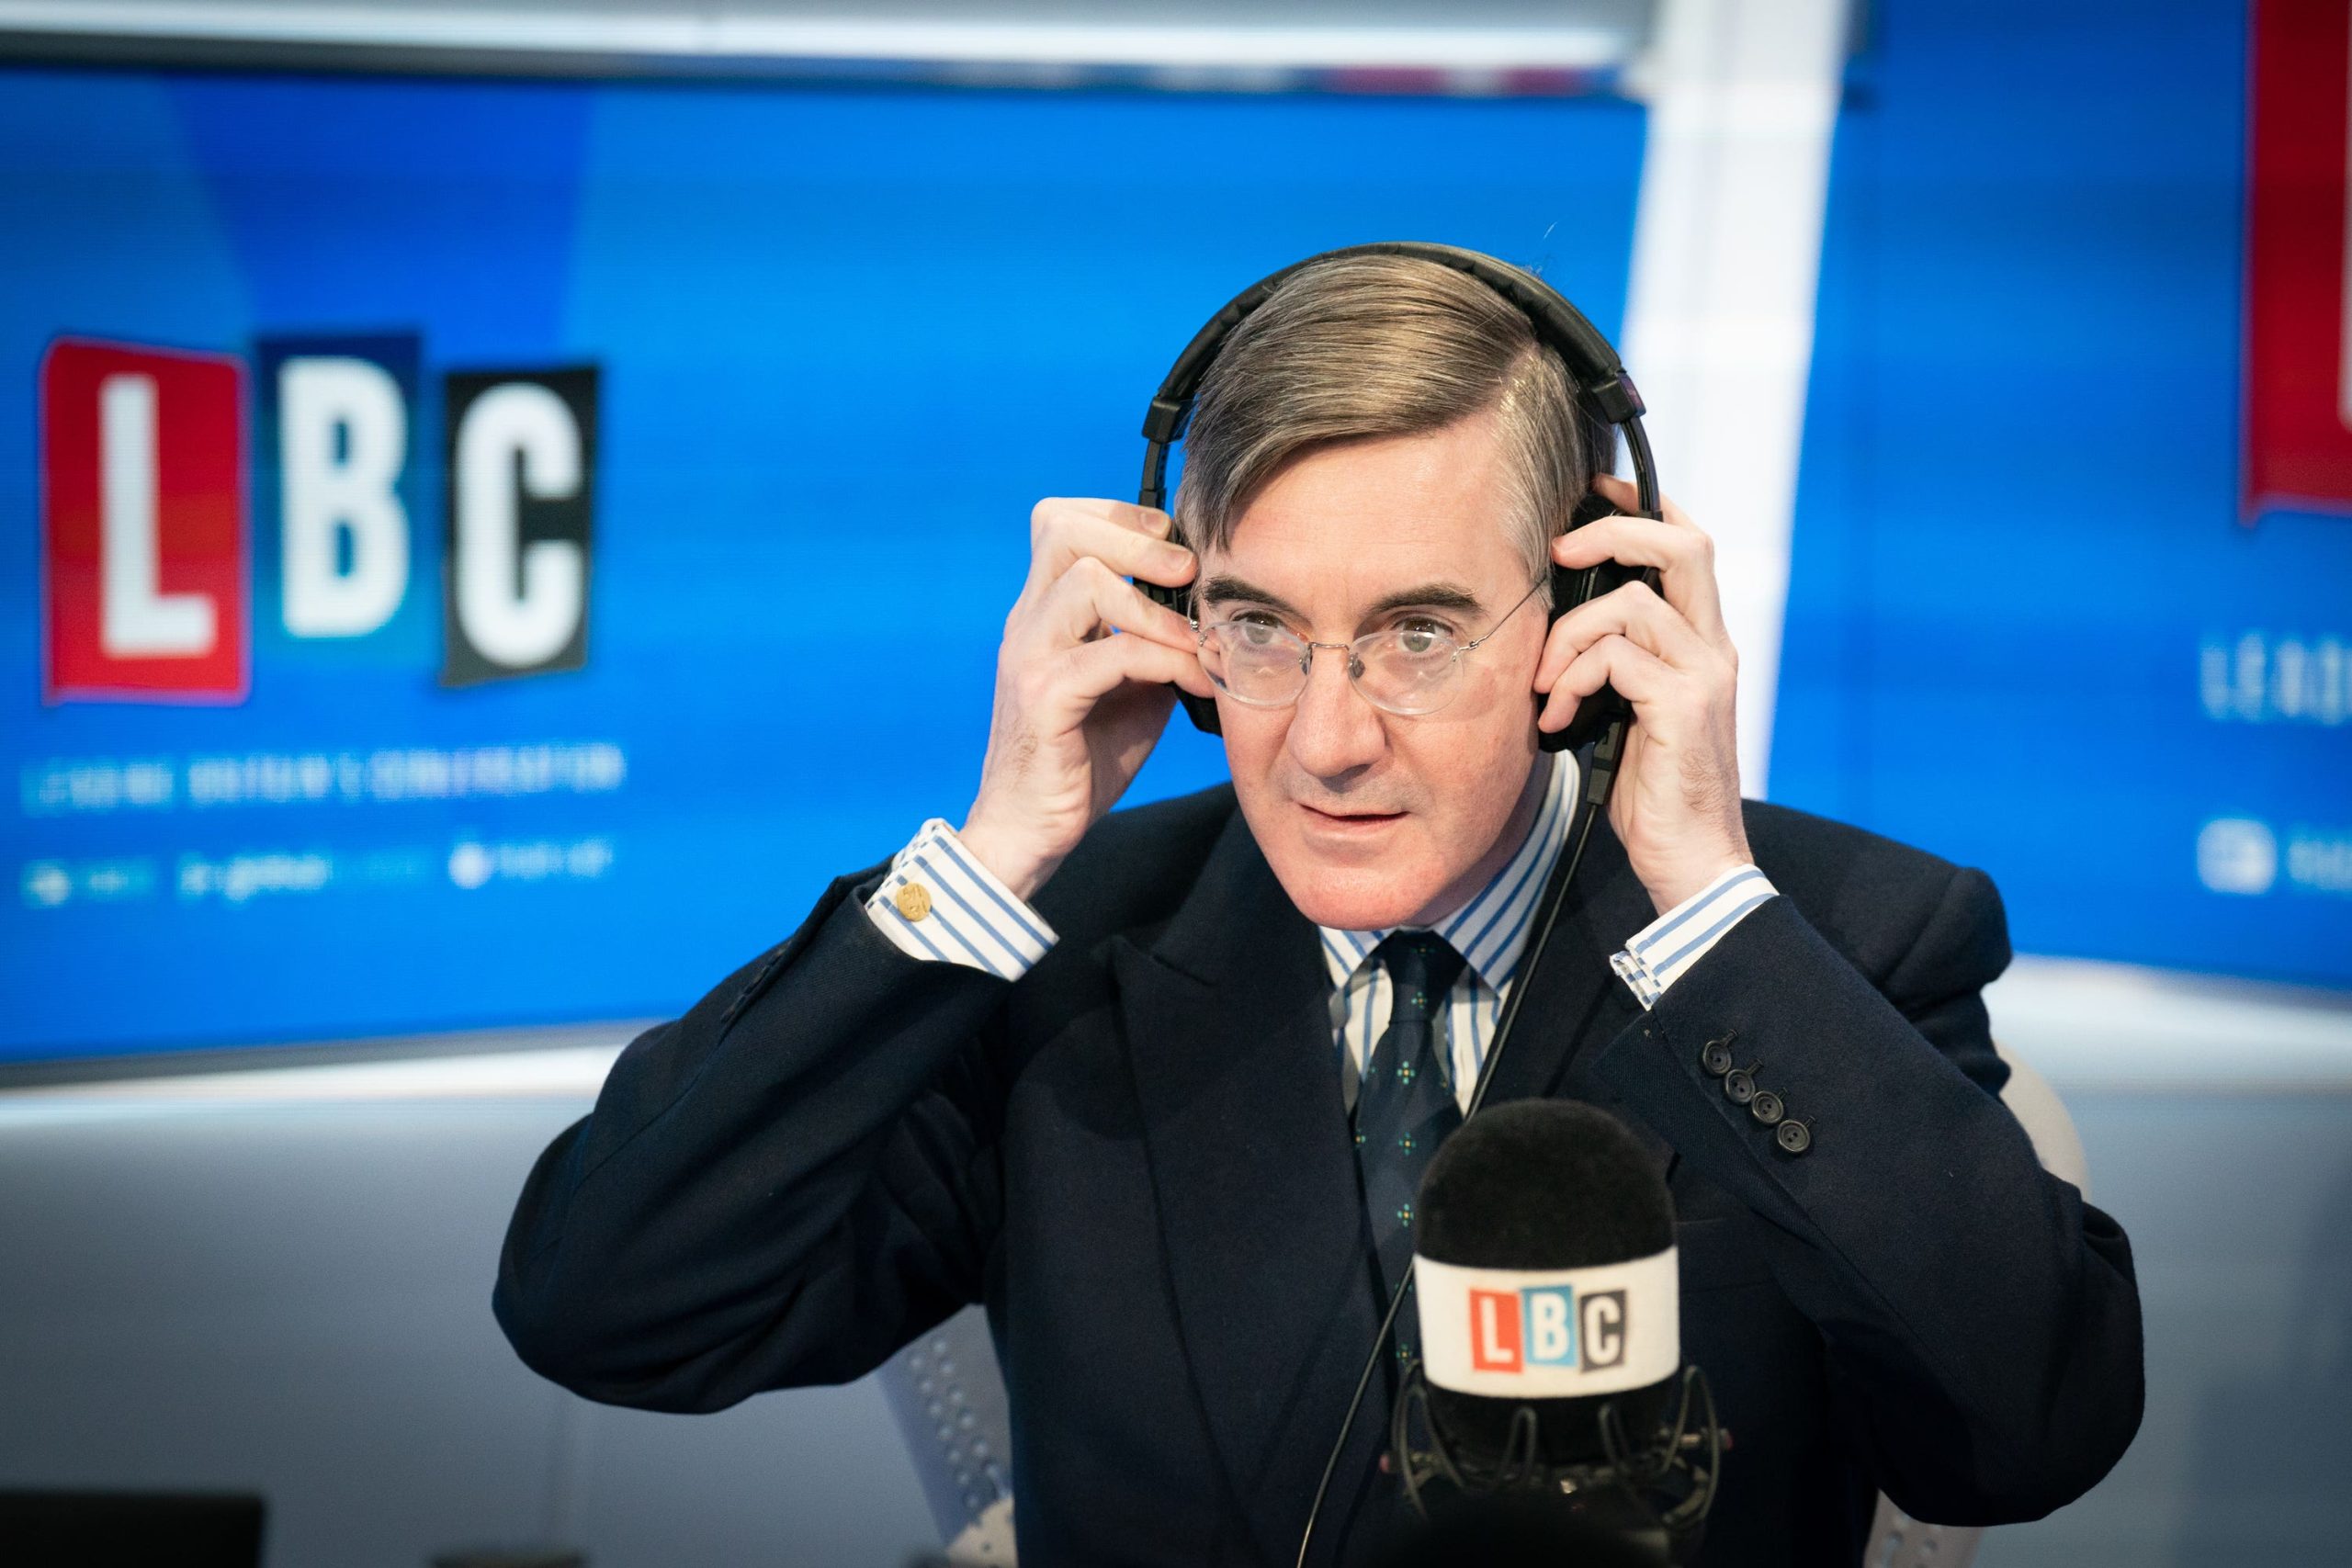 Rees-Mogg claims economic crisis ‘very little to do with Brexit’ – nobody is falling for it